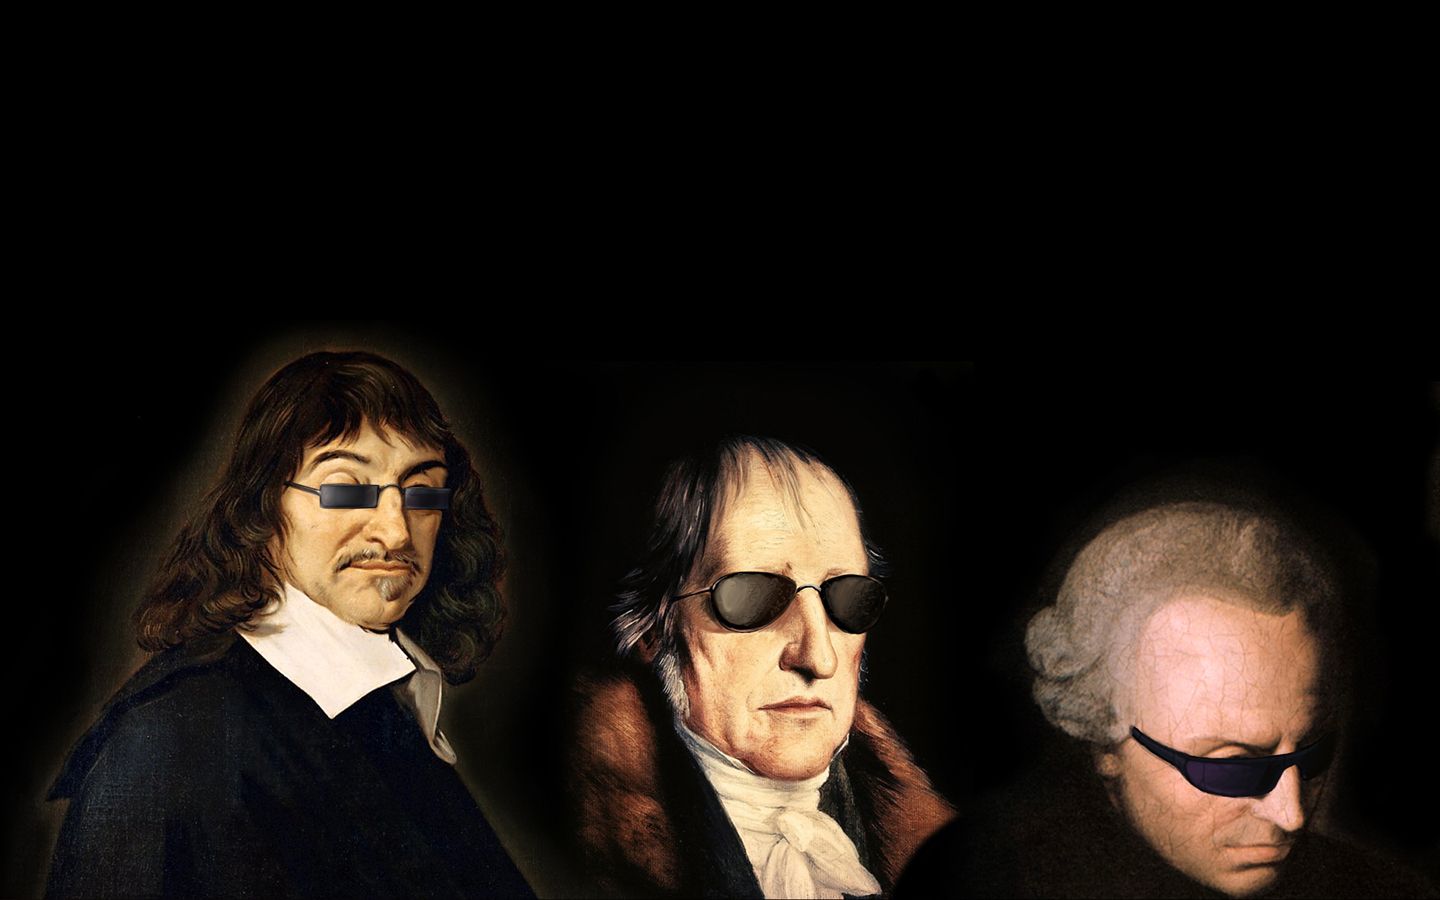 Cool Philosophers Descartes Kant And Hegel With Sunglasses Wallpaperx900